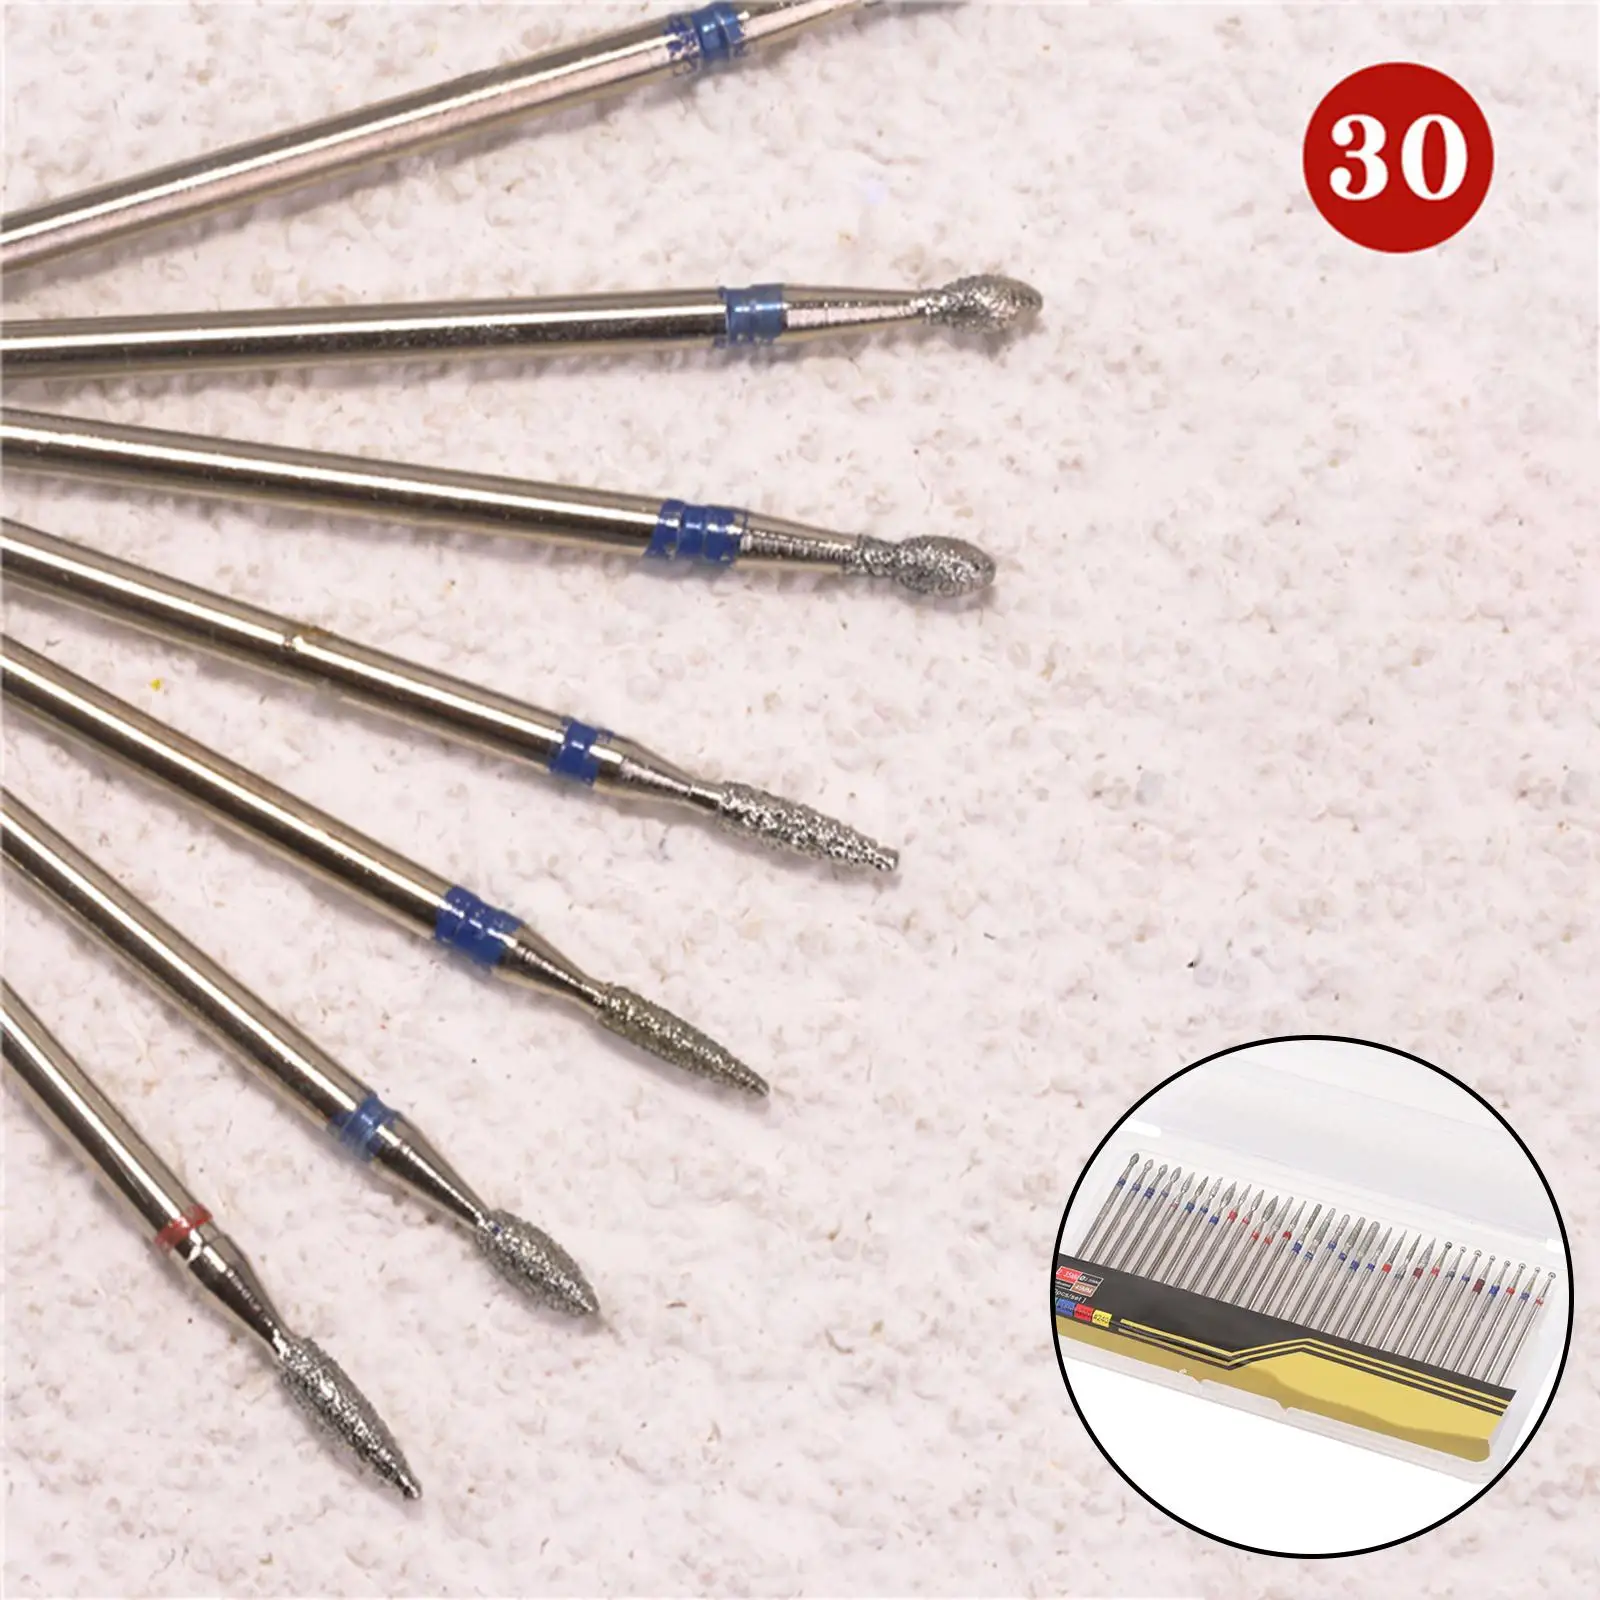 30 Pieces Nail Drill Bits Tungsten Steel Milling Cutter Bit Set for Remove Manicure Pedicure Home Use Professional